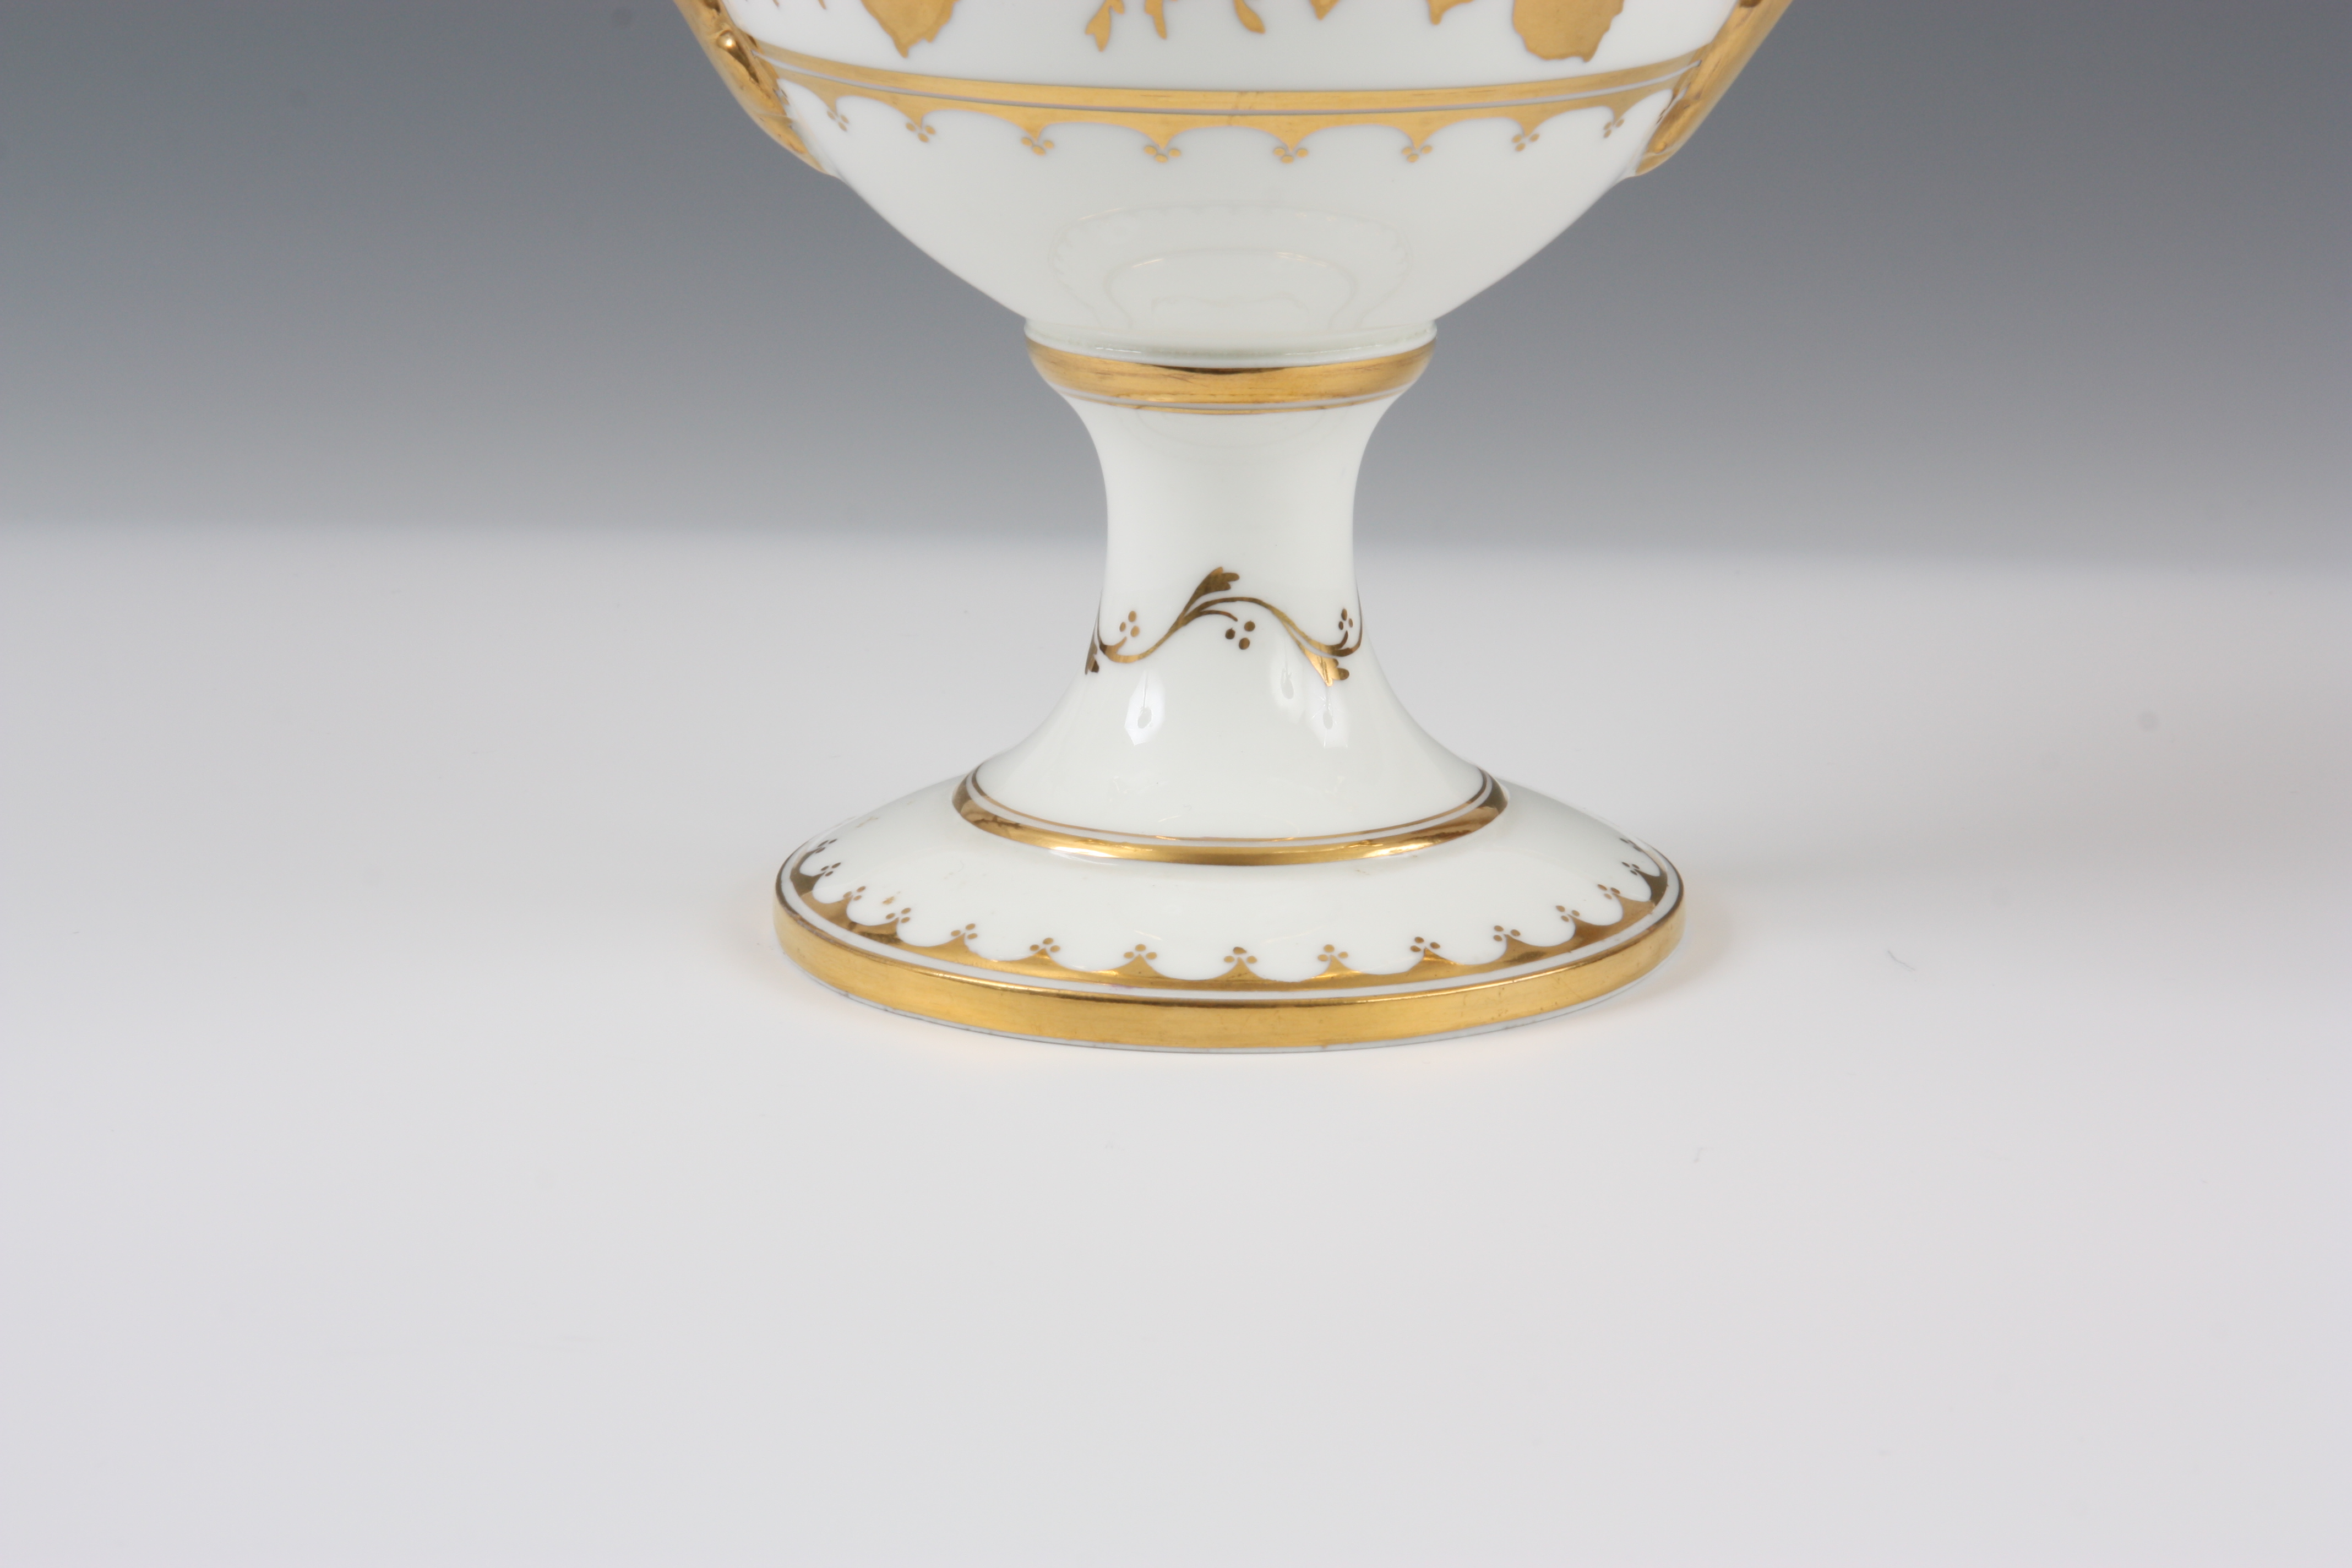 A LATE 19TH CENTURY CAULDON ROSE PATTERN PORCELAIN LOVING CUP decorated with gilt work and pink - Image 3 of 4